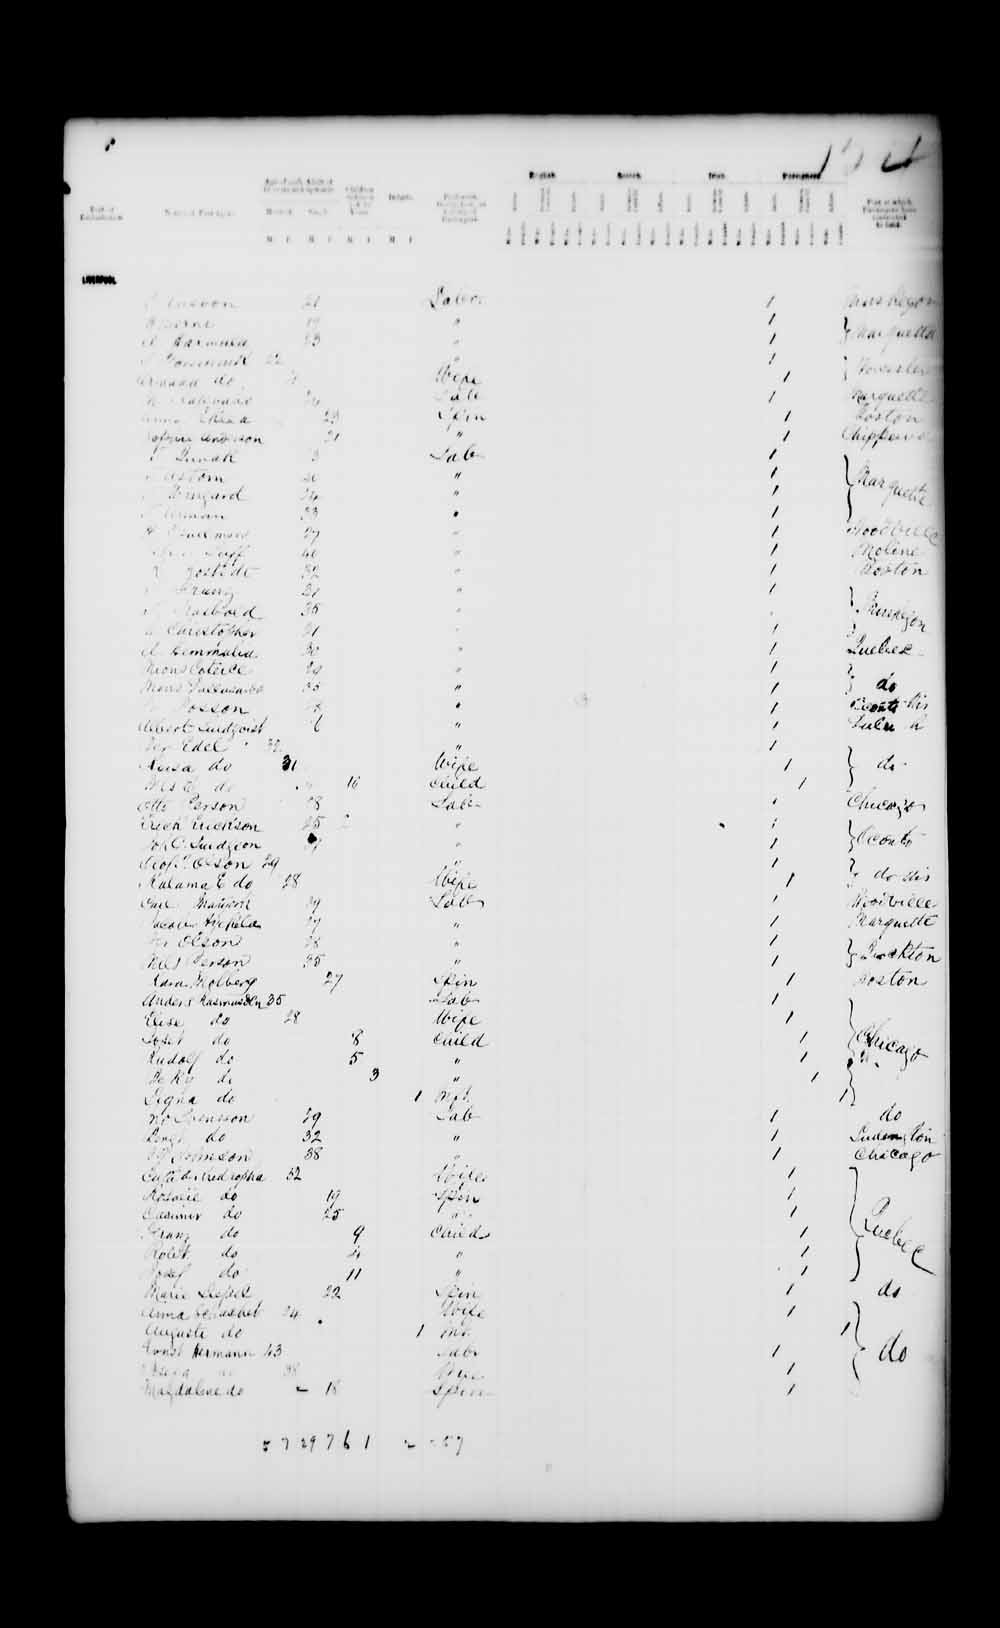 Digitized page of Passenger Lists for Image No.: e003541218